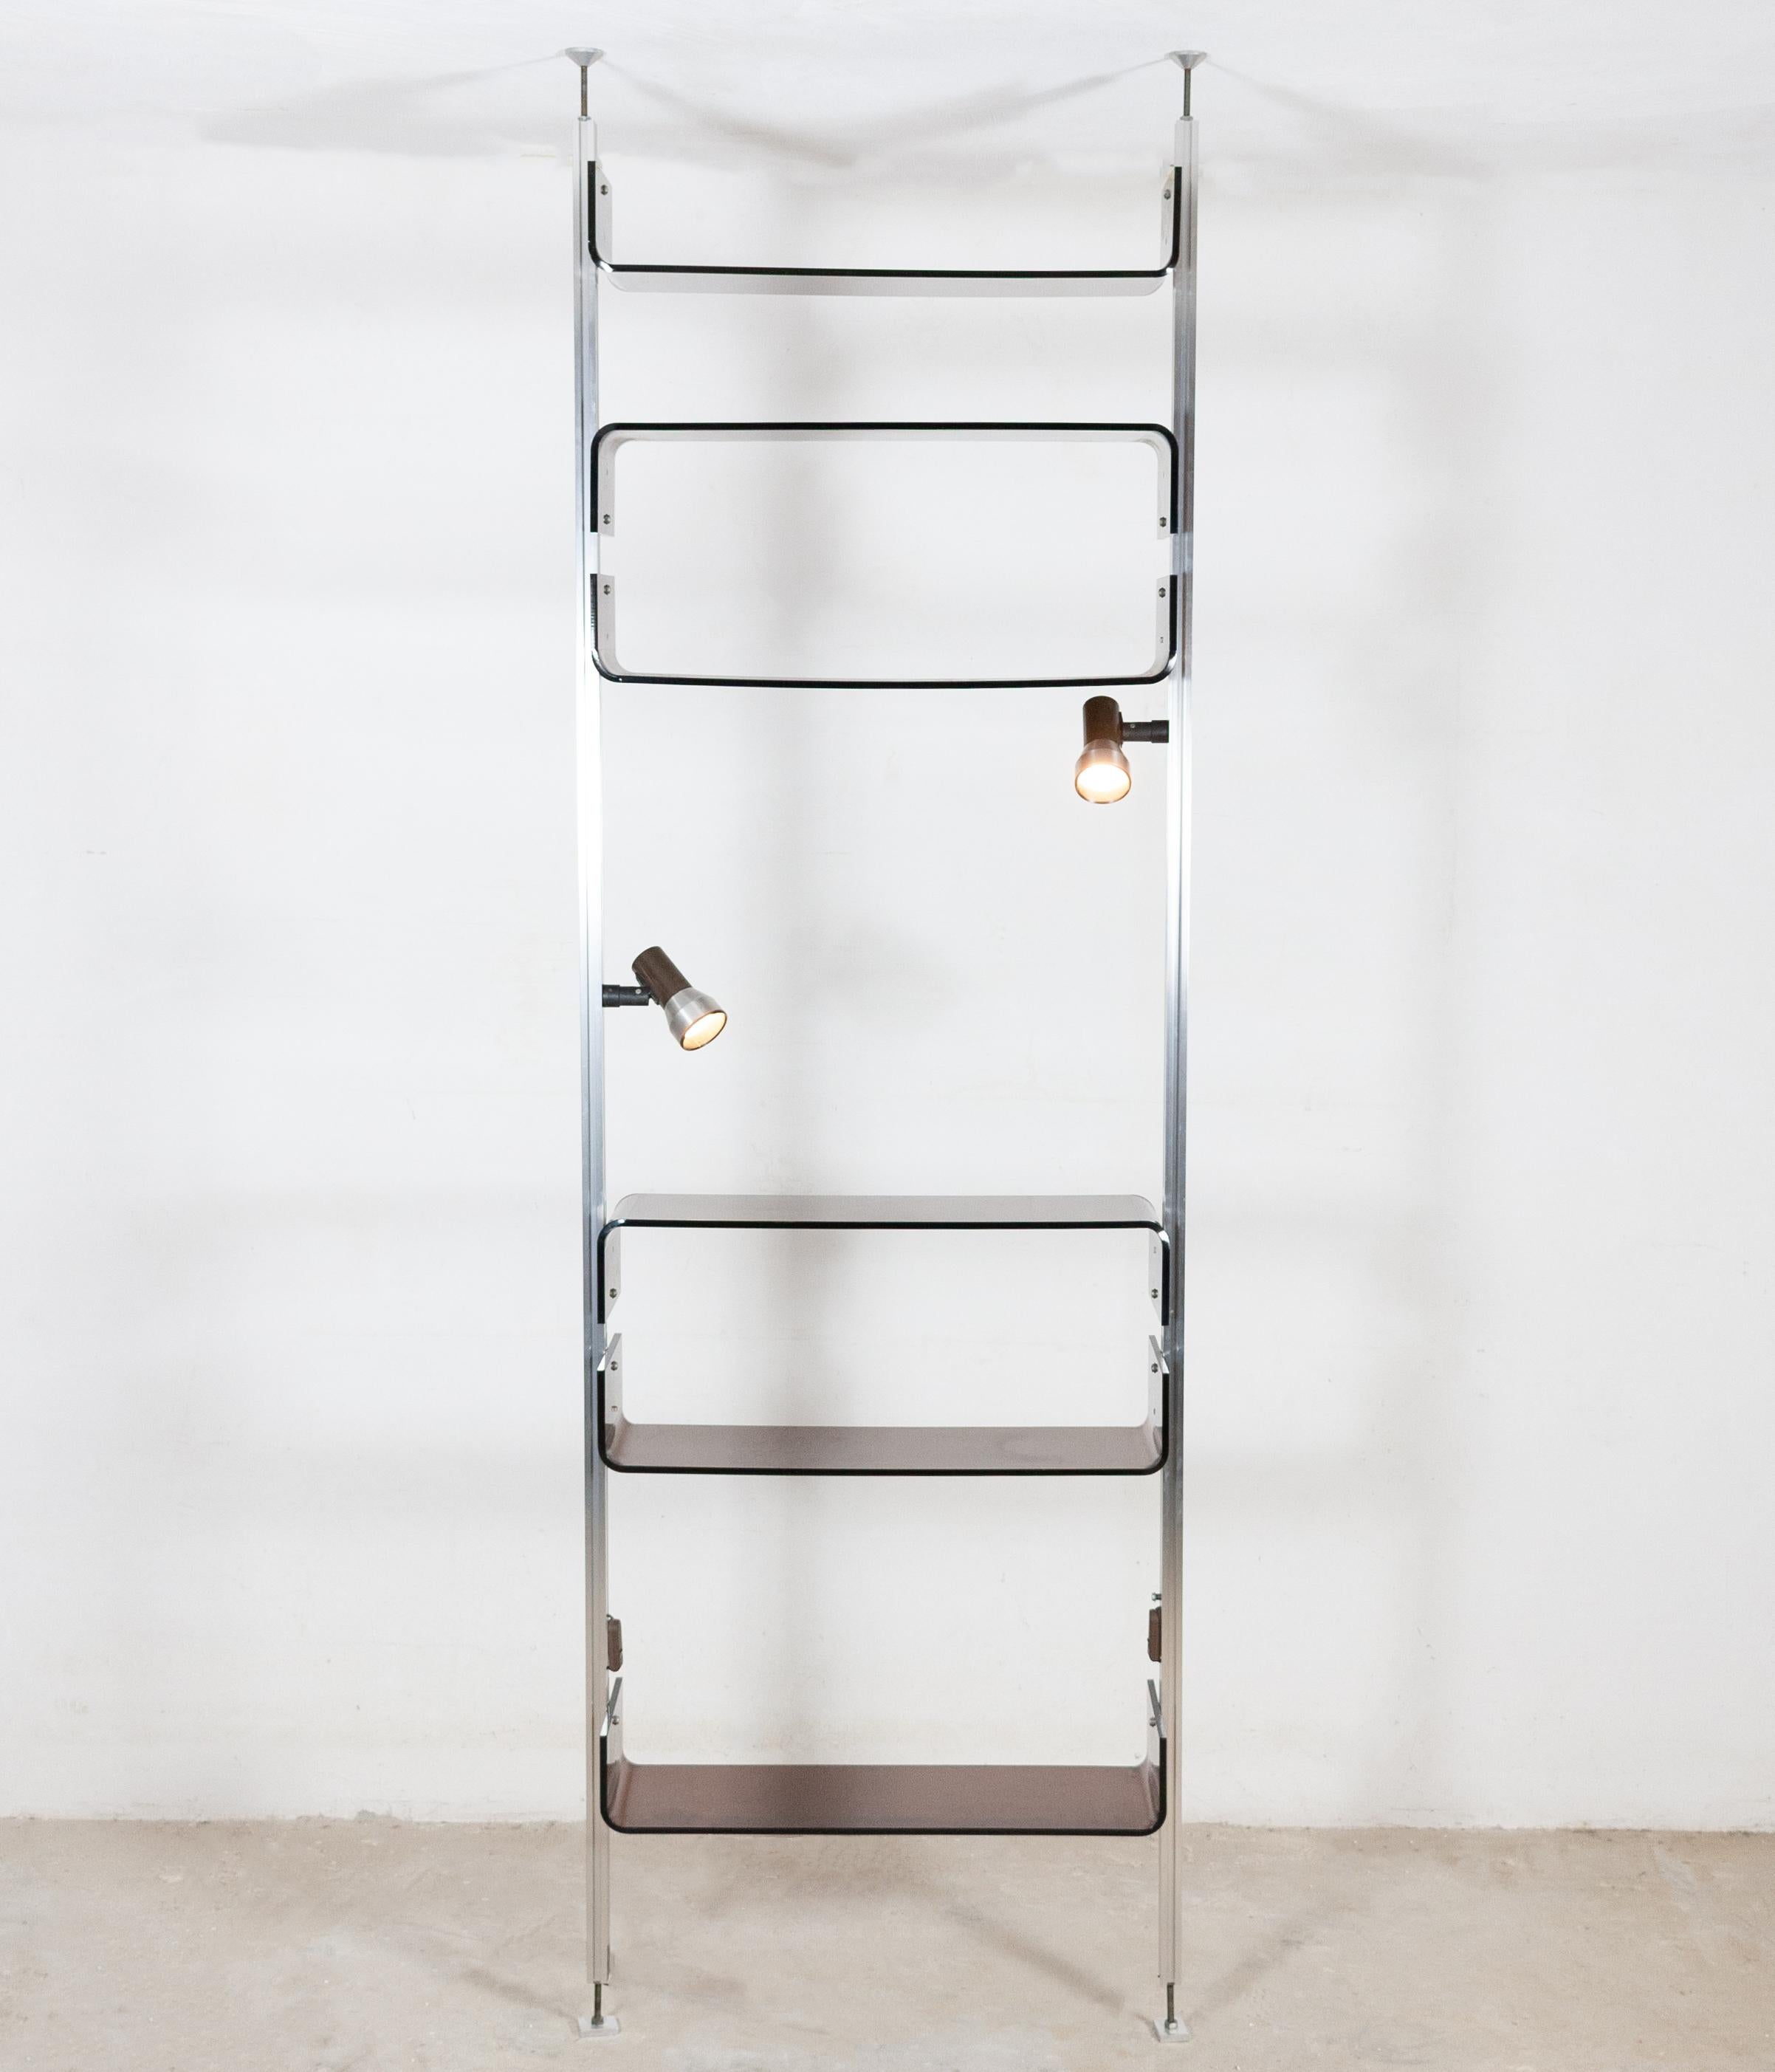 Beautiful shelving unit designed by Michel Ducaroy for the French designer furniture company Roche Bobois in 1970. 

The unit consists of six Lucite shelves and two integrated spotlights which attach to a pair of Aluminum uprights clamped between